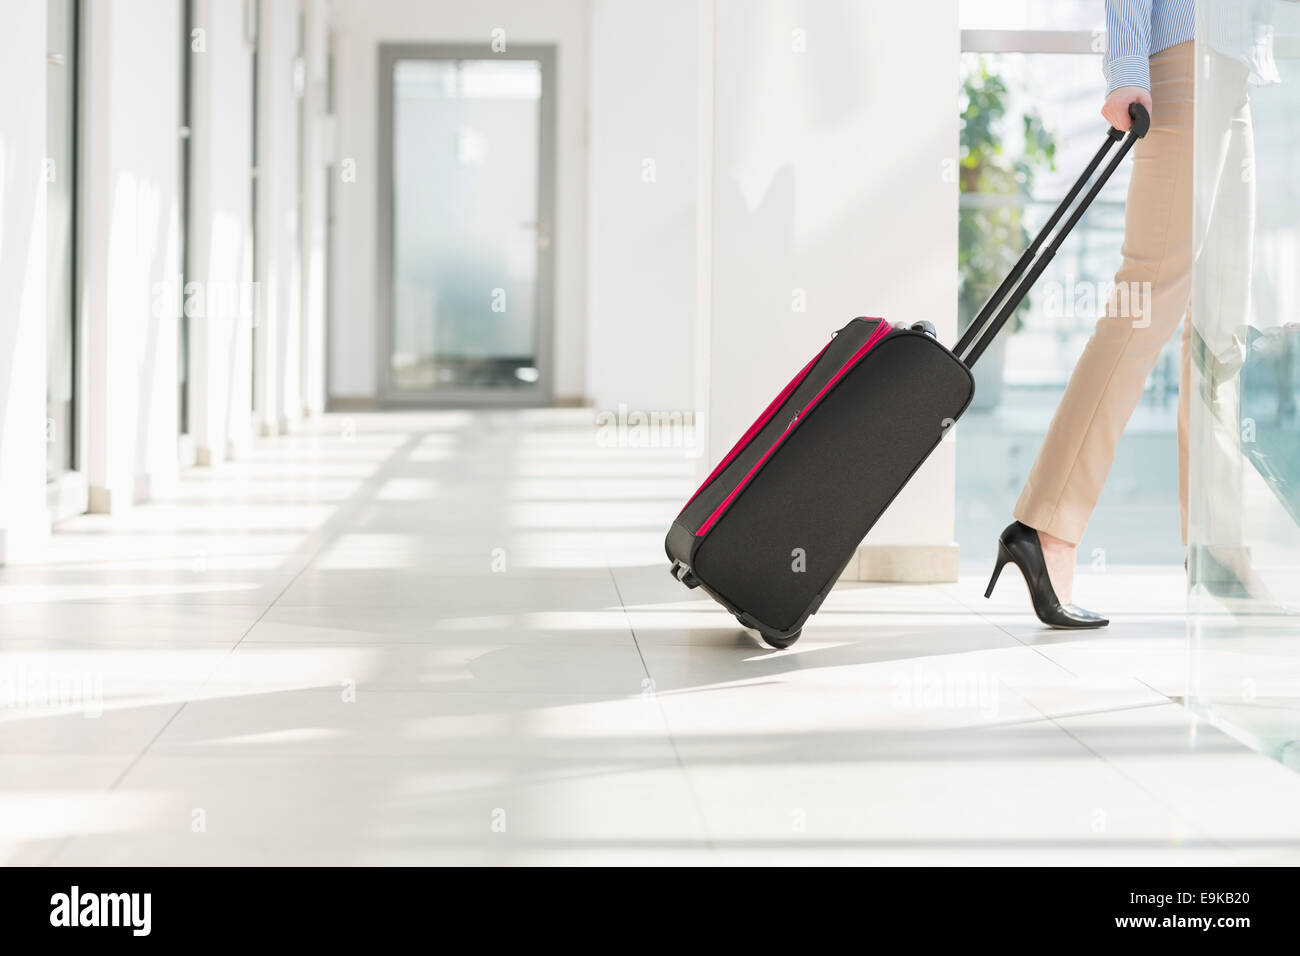 Low section of businesswoman with luggage leaving airport Stock Photo